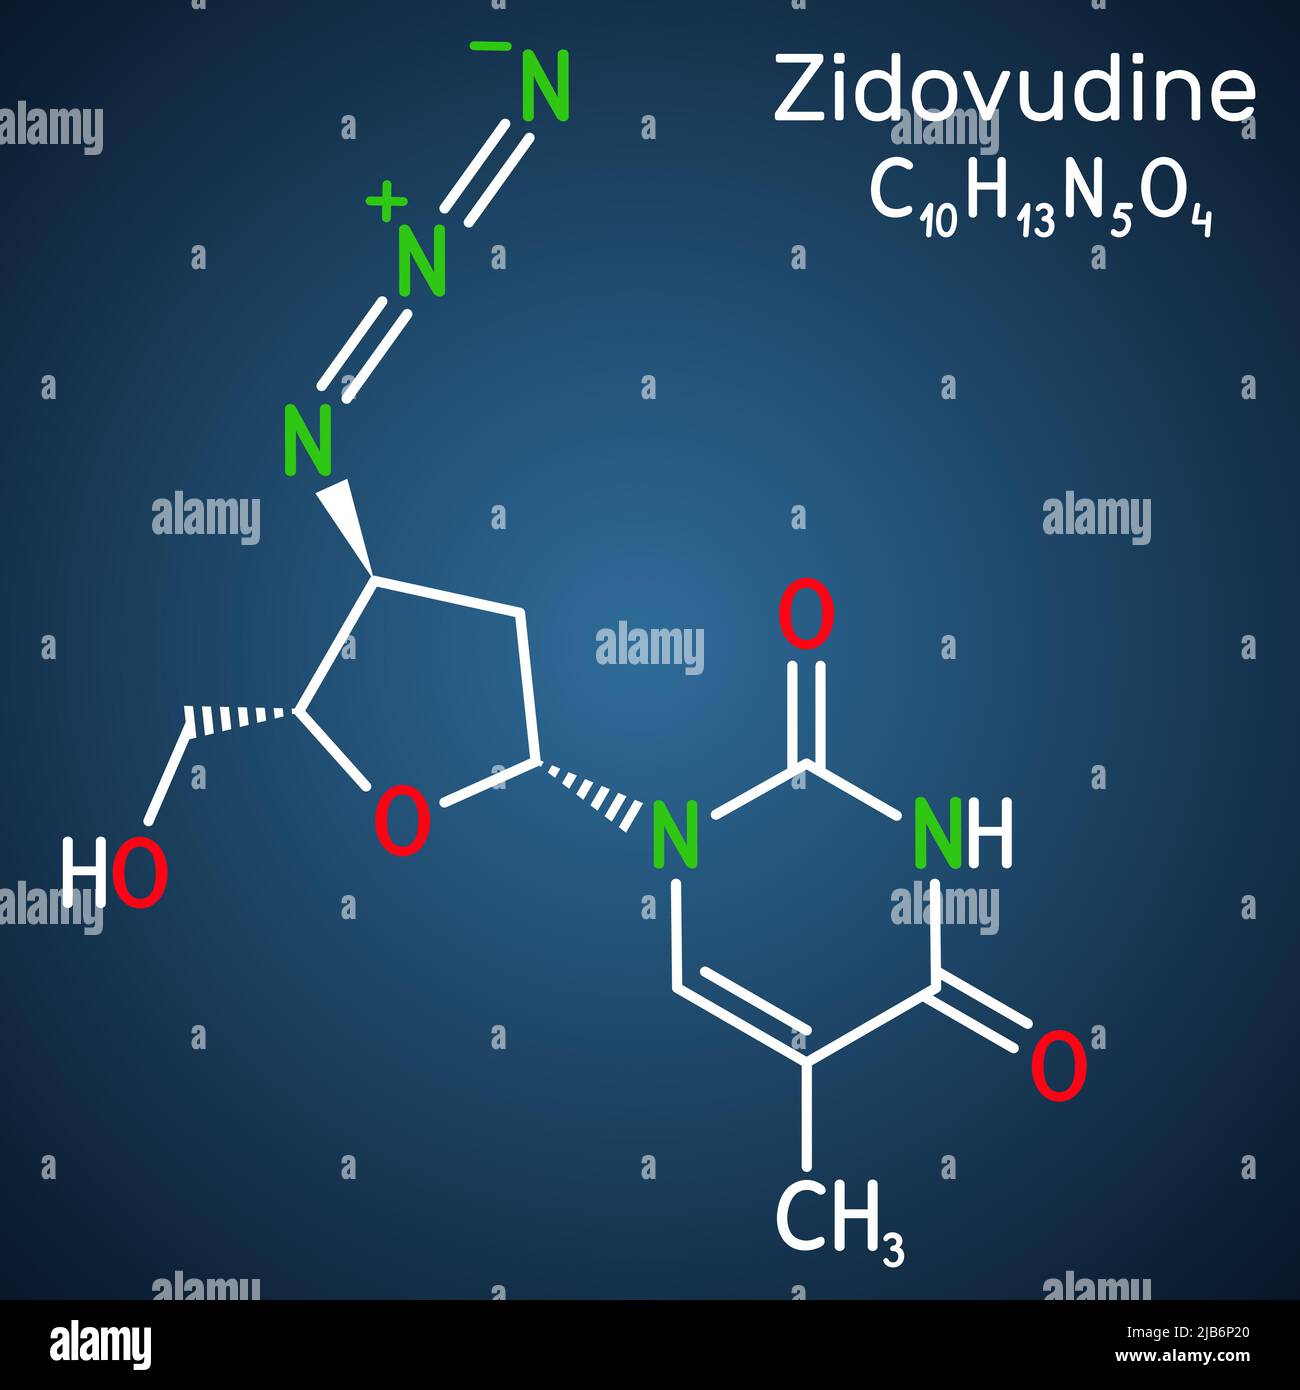 Zidovudine, ZDV, azidothymidine, AZT molecule. It is synthetic dideoxynucleoside, used in the treatment of HIV and AIDS. Dark blue background. Vector Stock Vector